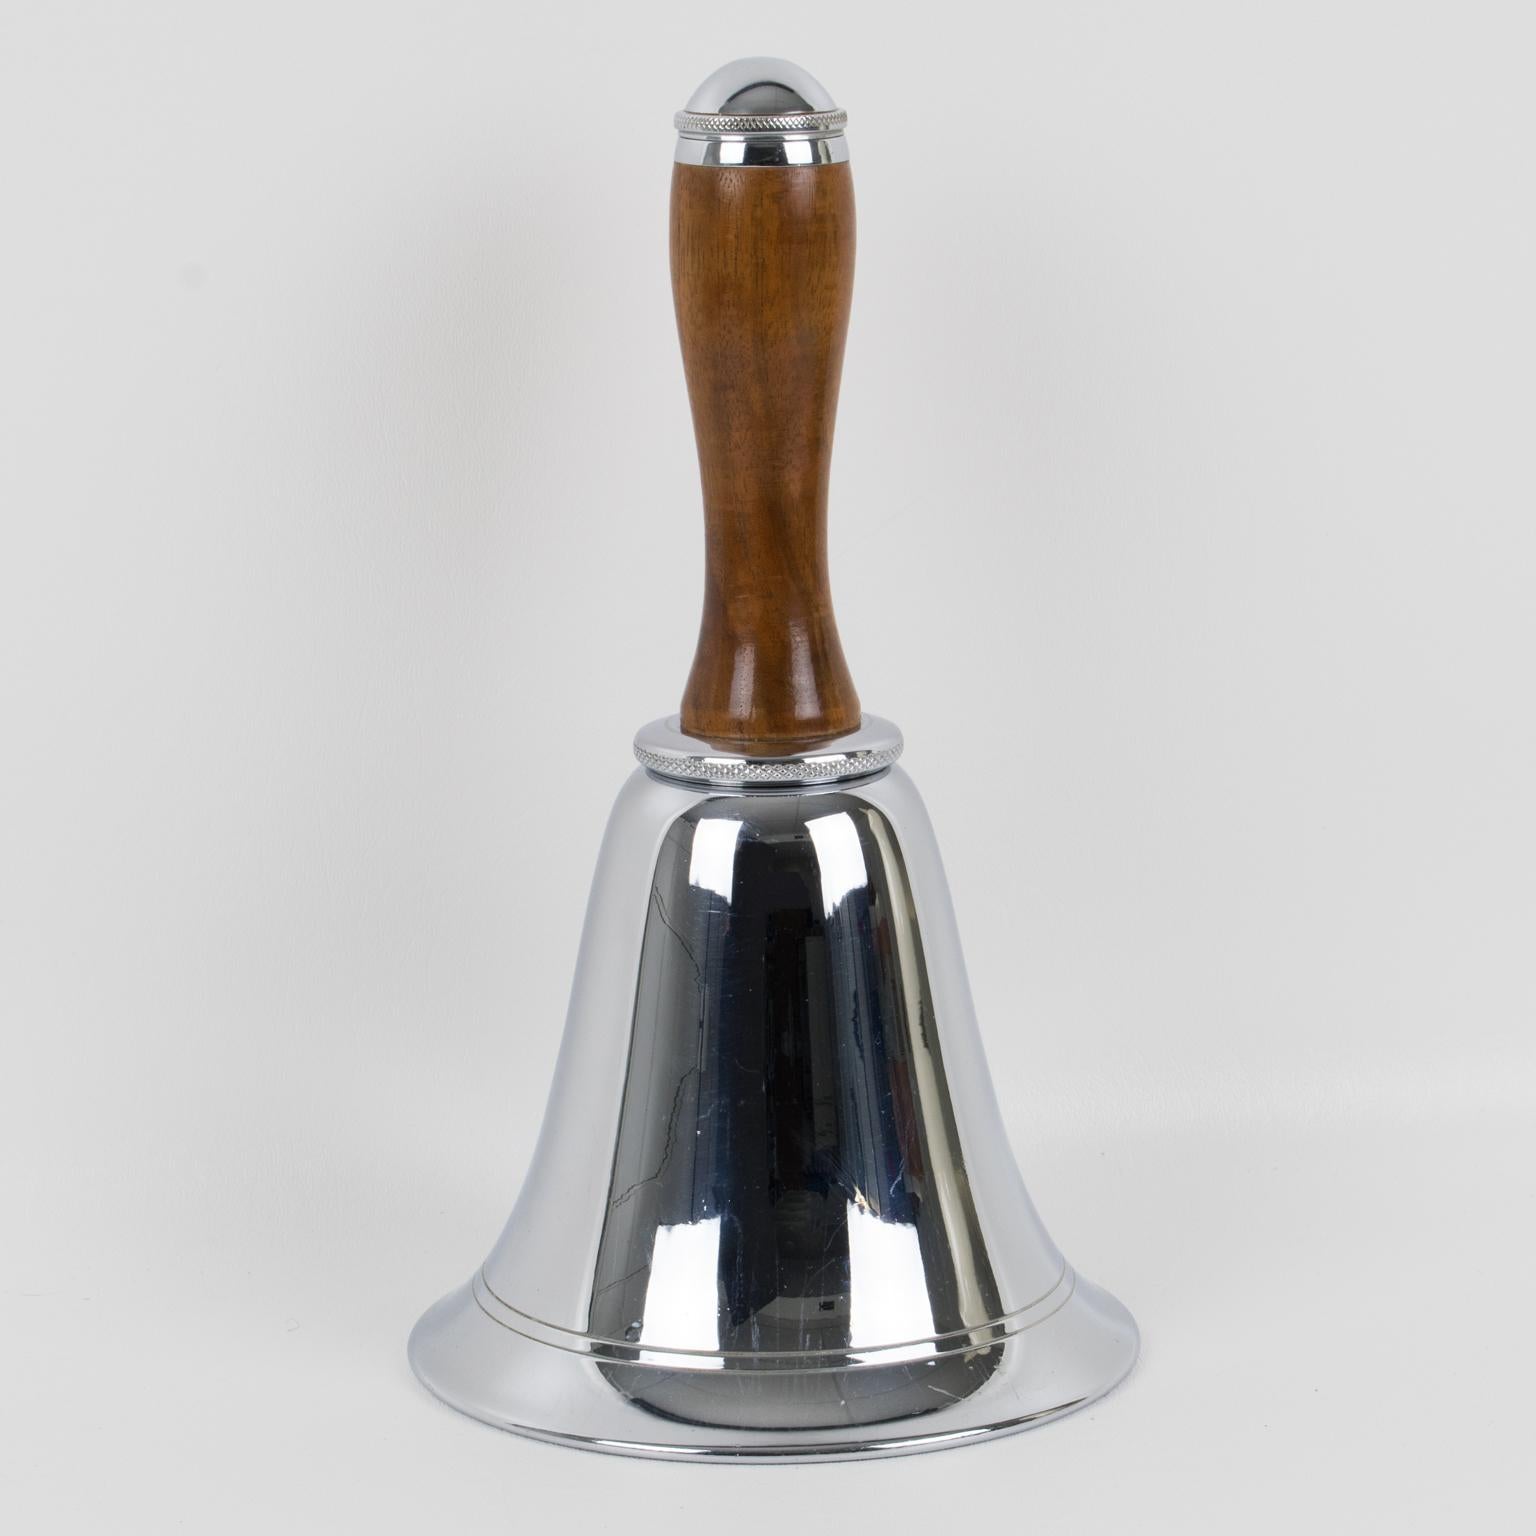 This is a stunning Art Deco wood and chrome cocktail or Martini shaker designed in England circa 1930. Streamline Art Deco design, this barware piece is shaped like a bell and has two fine lines etched around the bottom of the flared dome. The